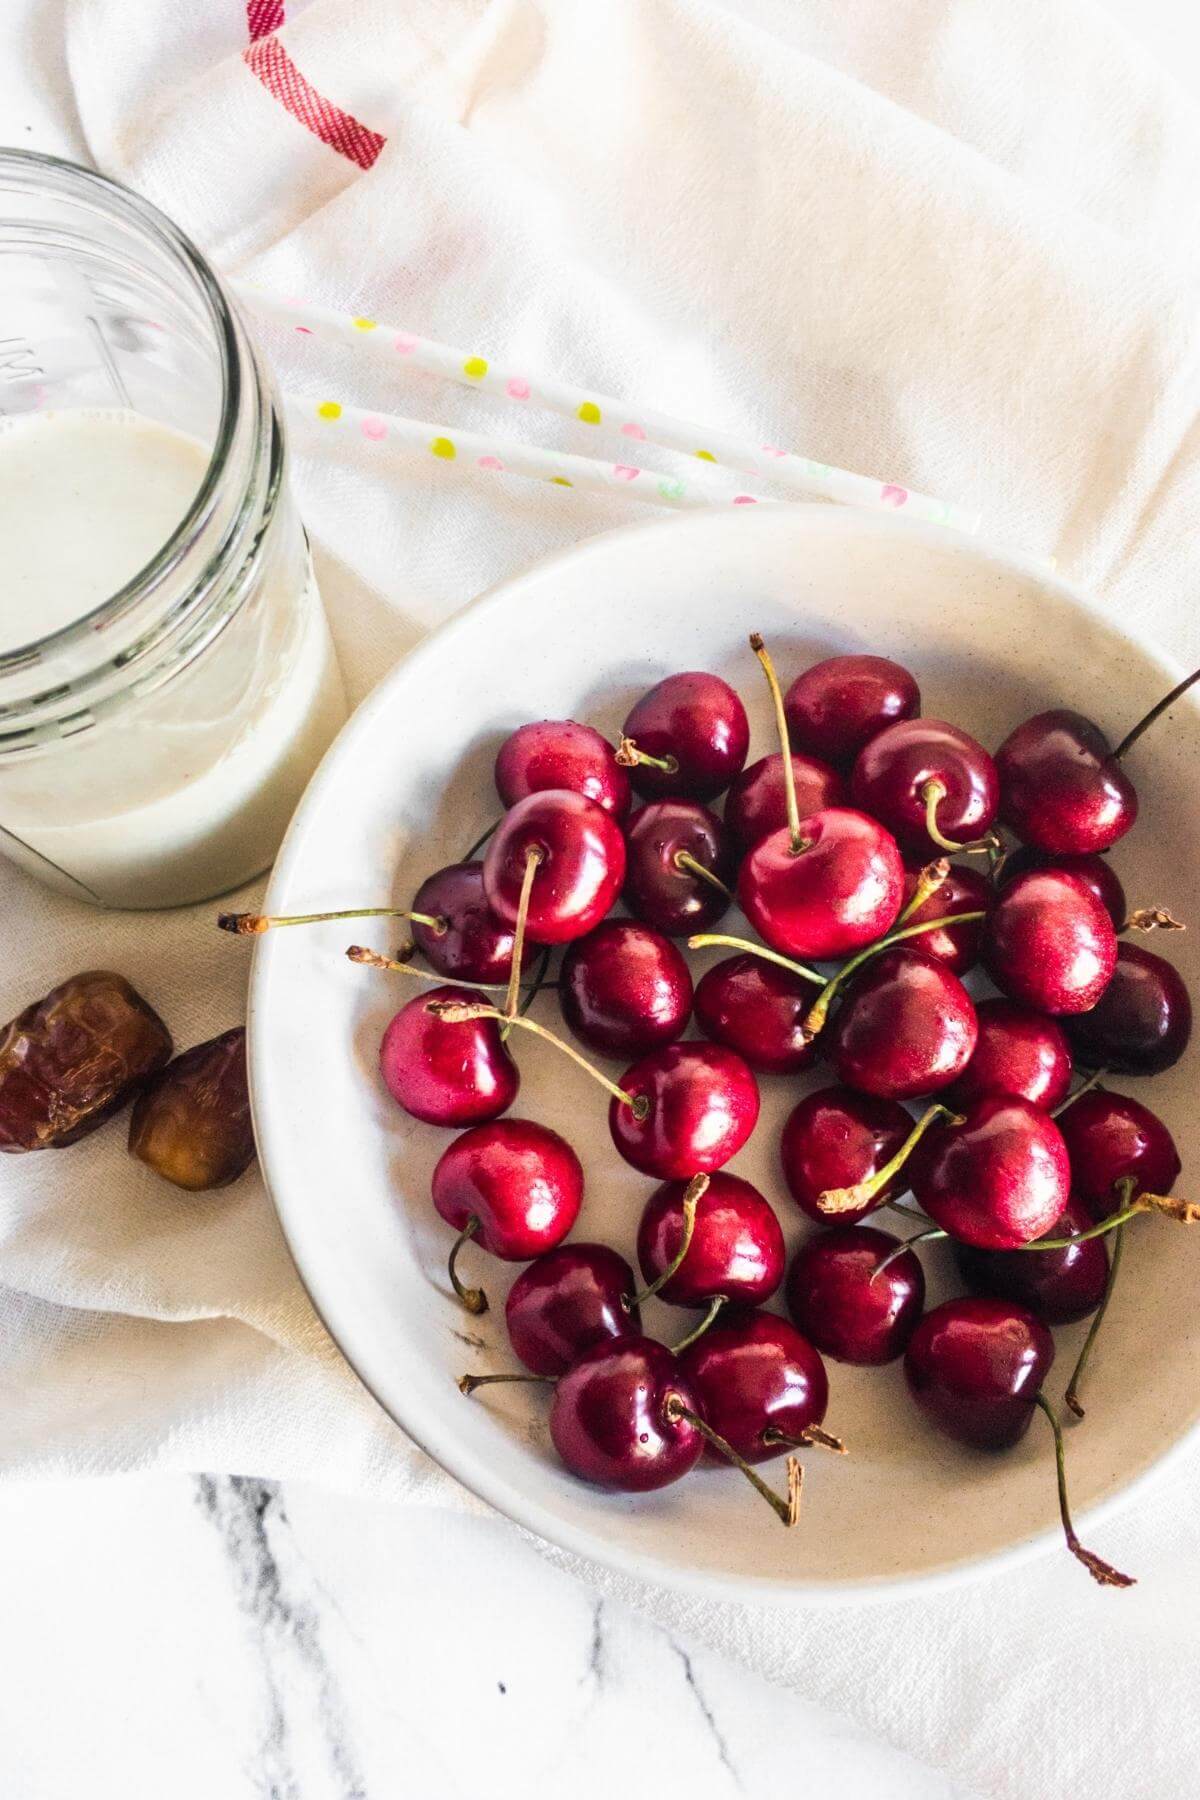 Ingredients for cherry and almond milk shake.